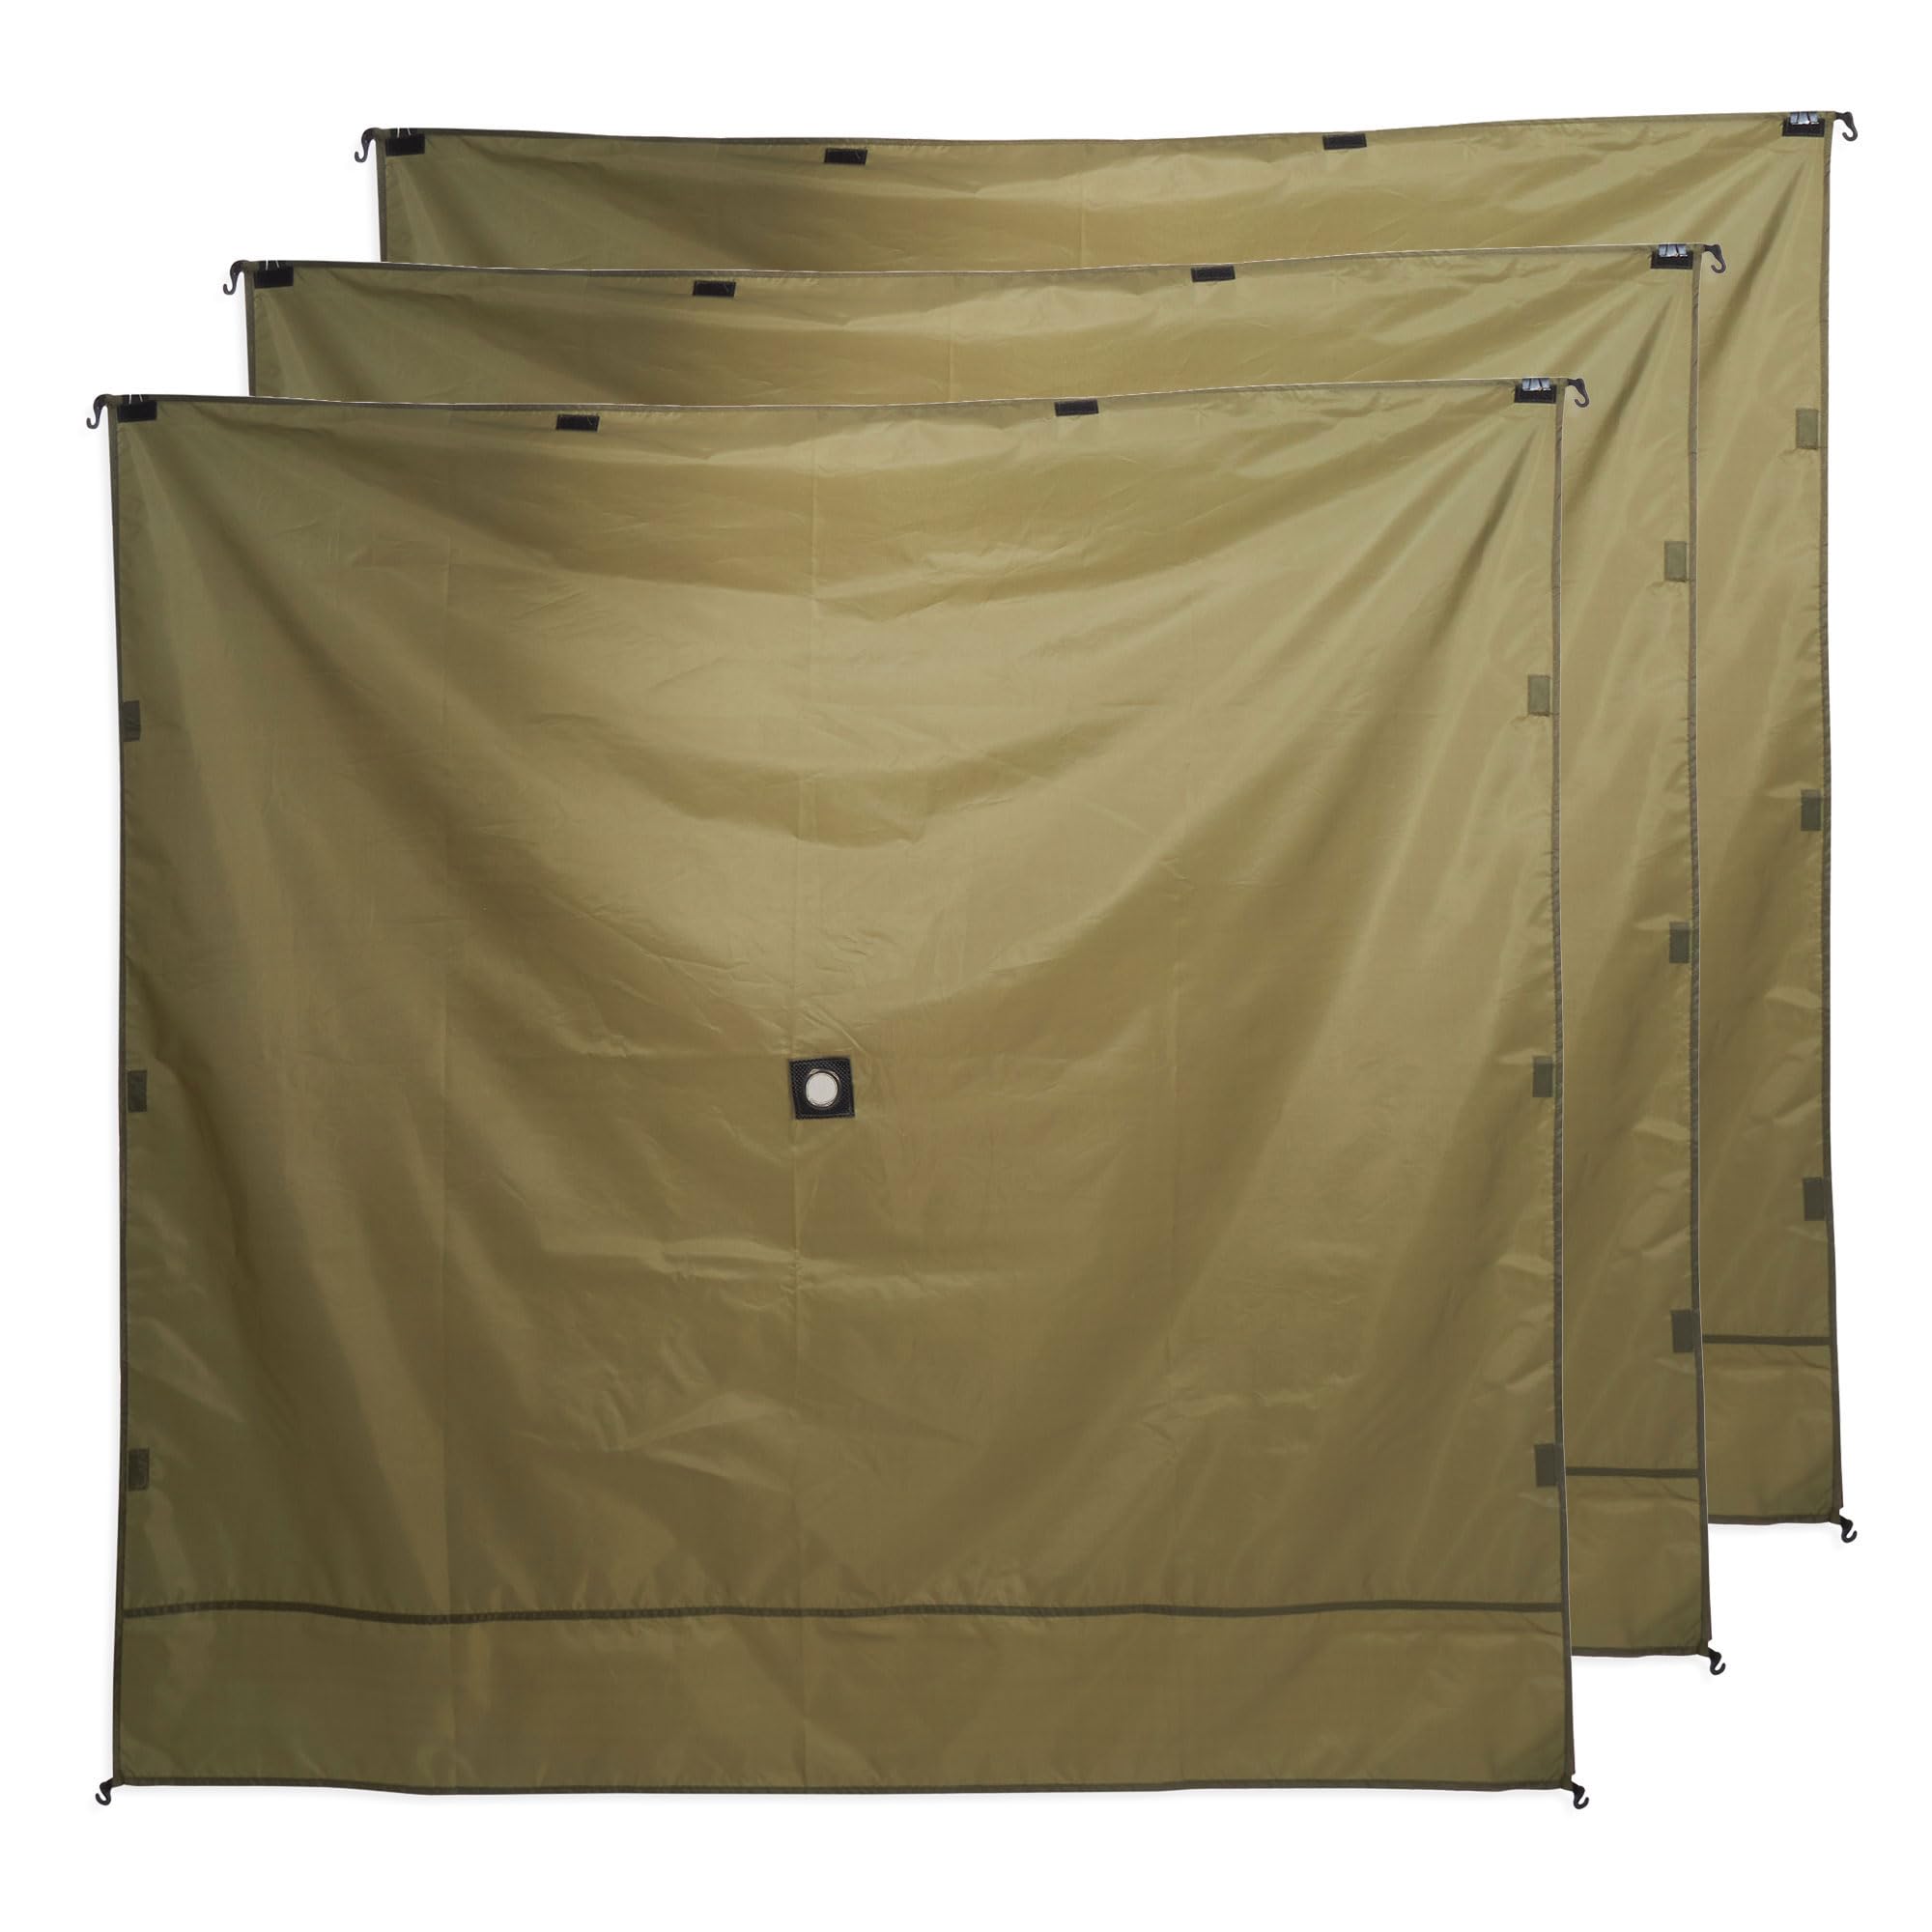 Clam Quick-Set Escape 12 x 12 Foot Portable Pop-Up Camping Outdoor Gazebo Screen Tent Canopy Shelter and Carry Bag with 6 Wind and Sun Panels, Green